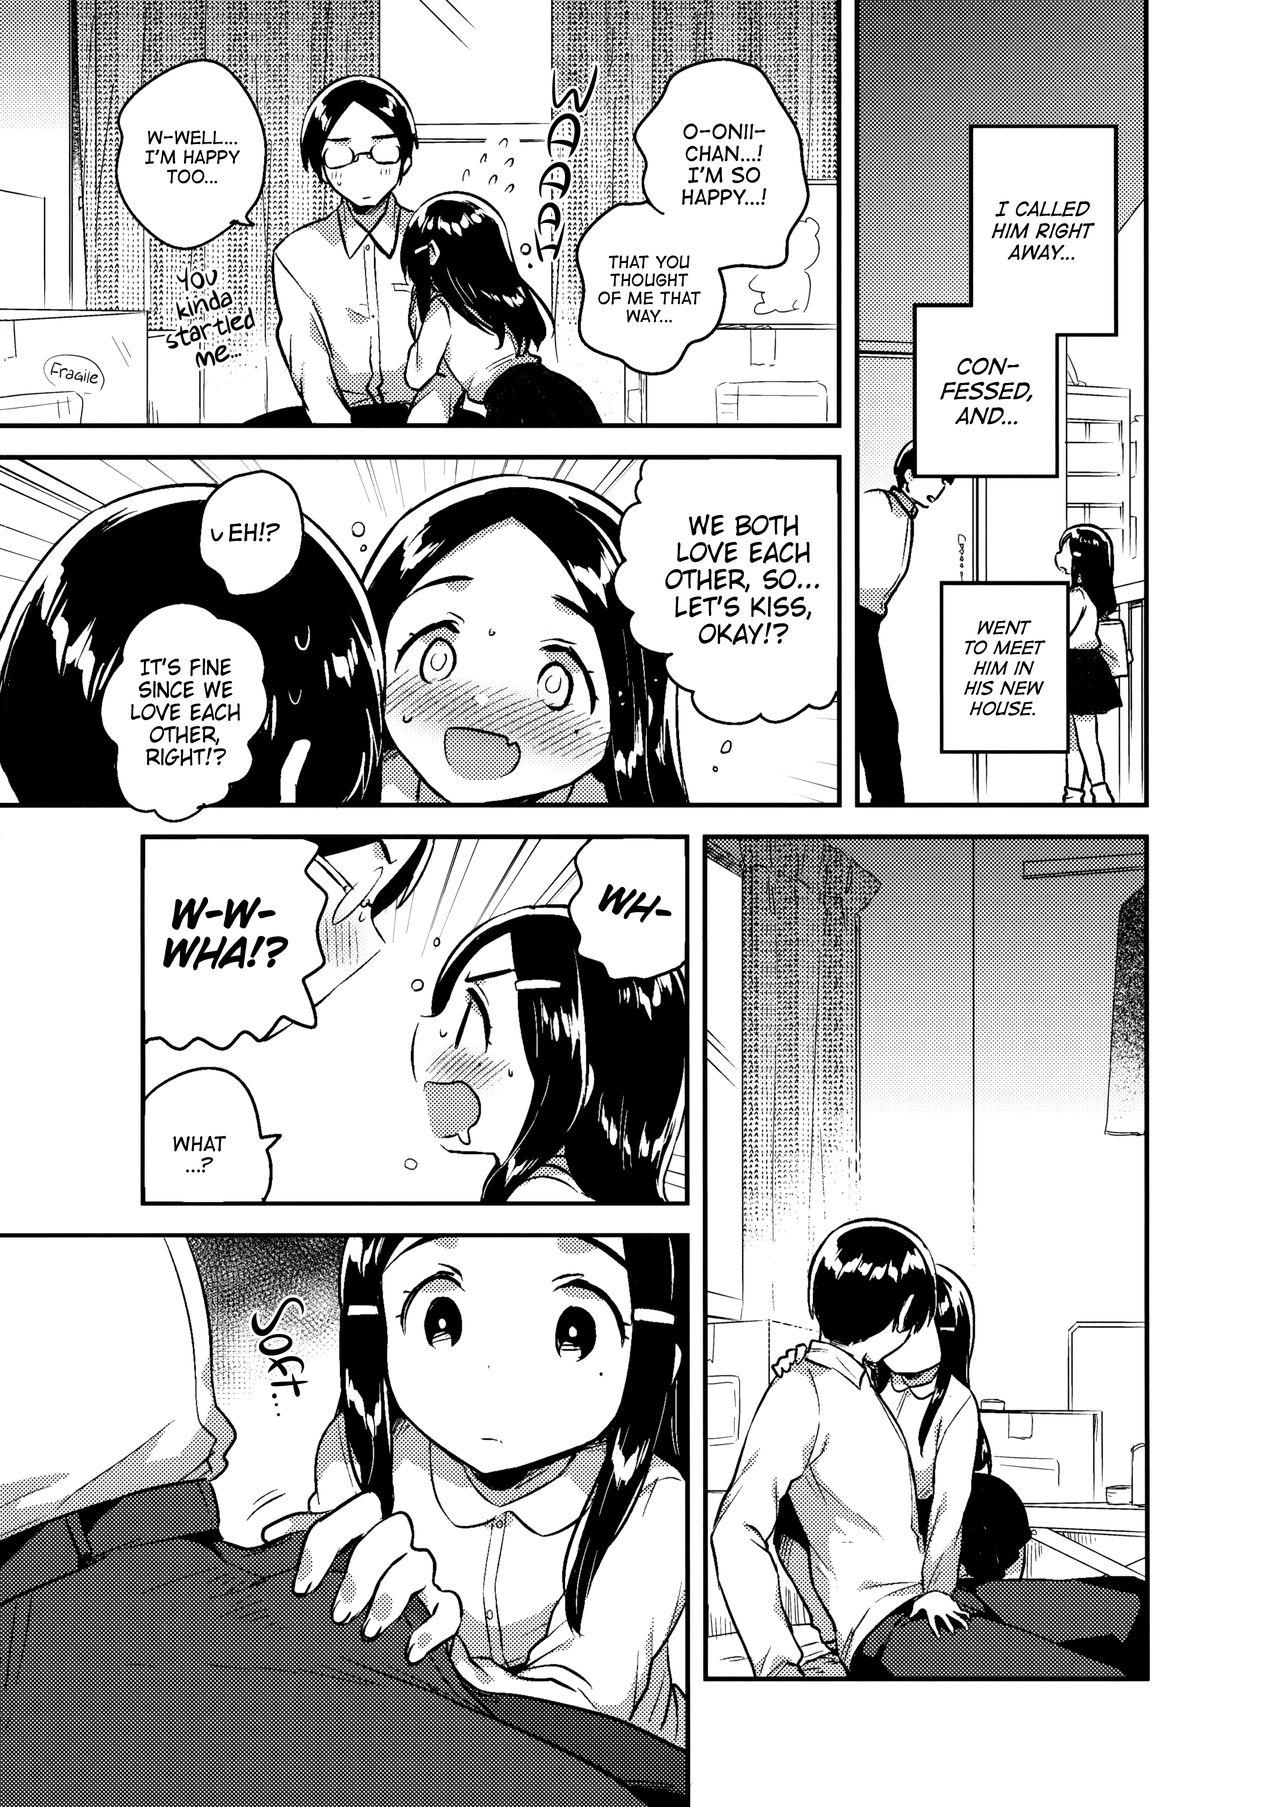 Imouto wa Mistress| My Little Sister Is My Mistress <First Chapter> 7